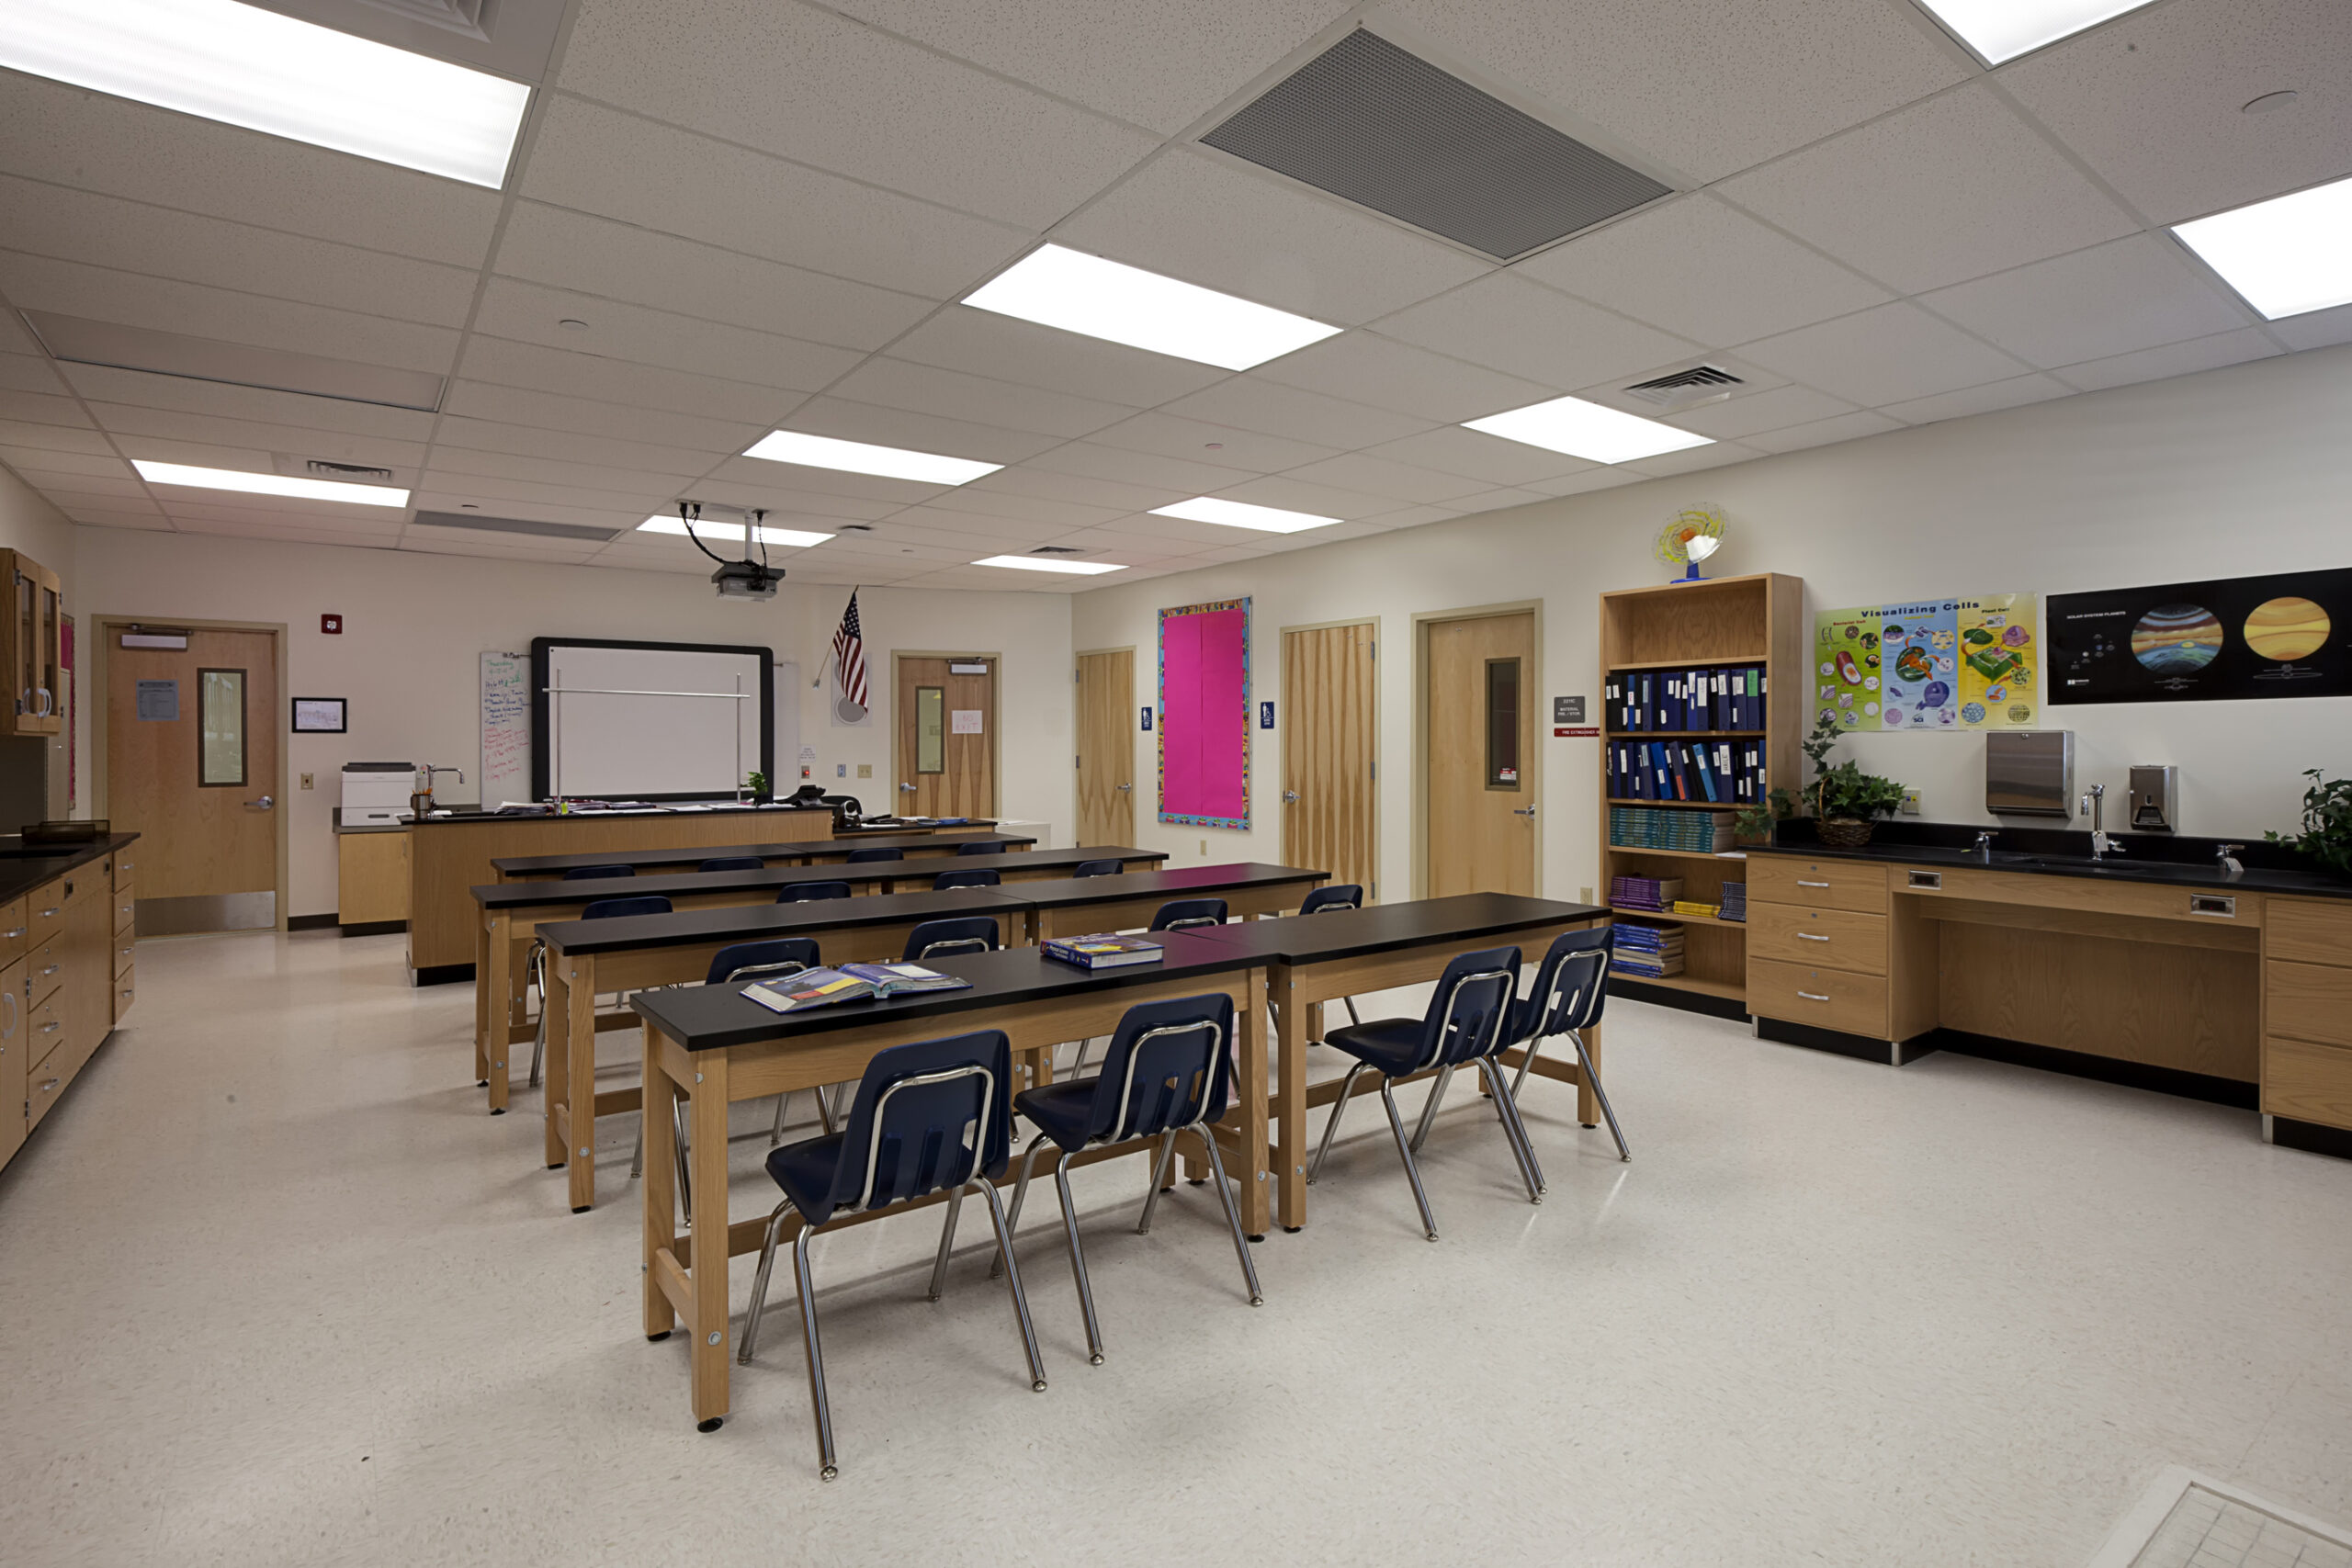 View of a science classroom in the Lanier-James Education Center